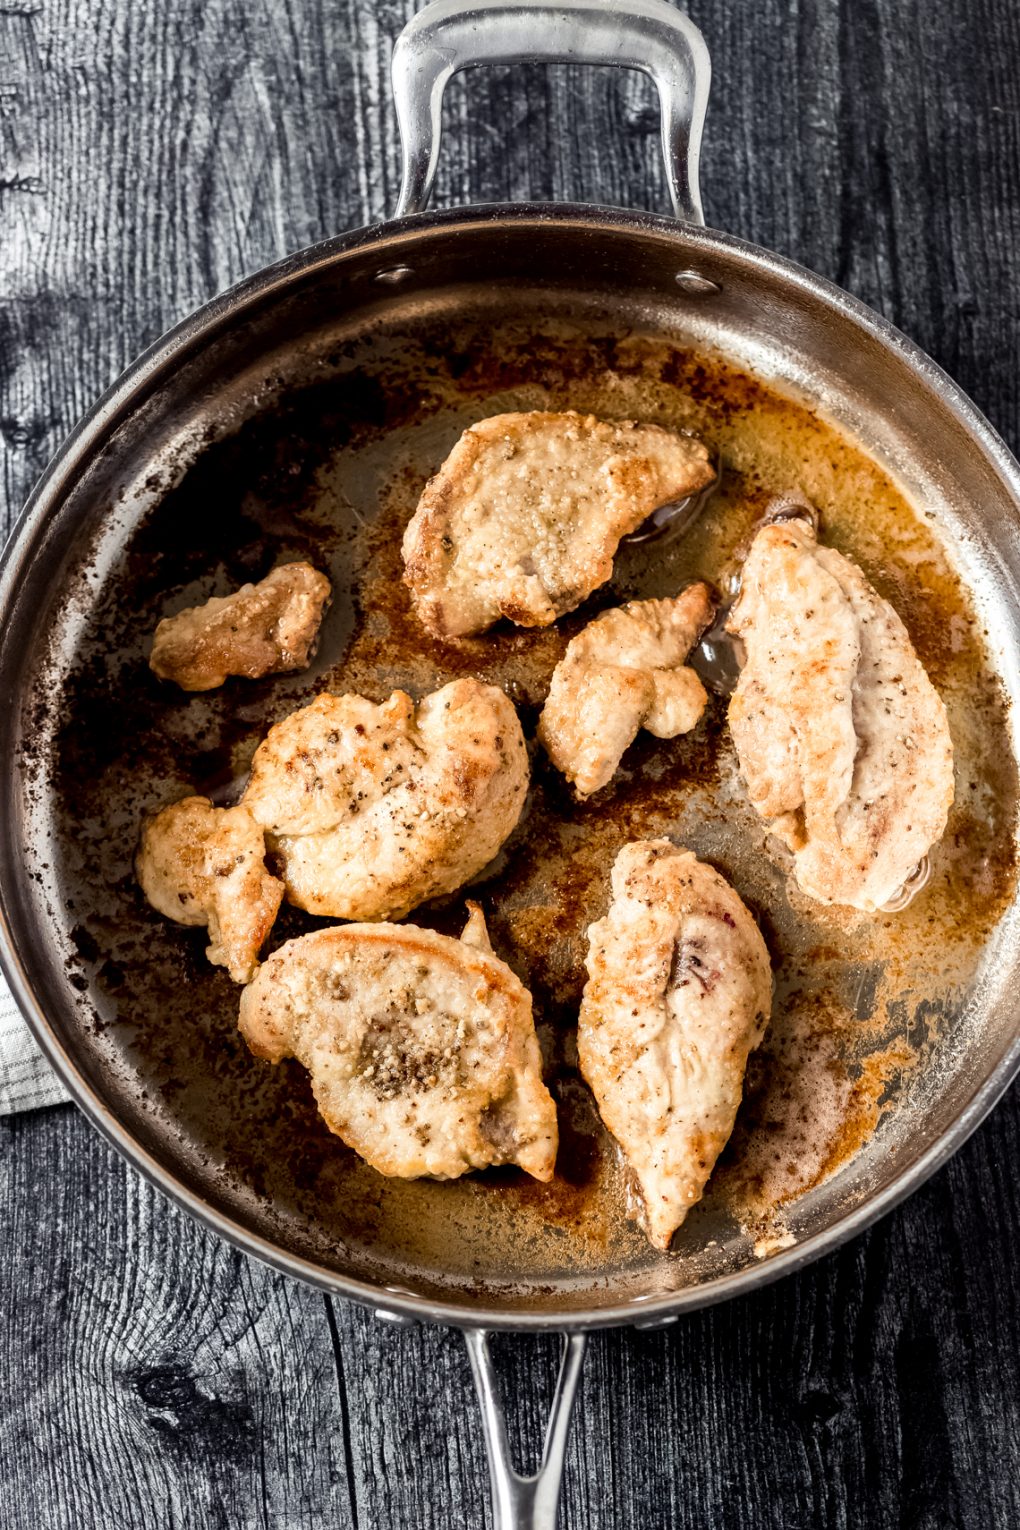 pheasant breasts sautéing in a skillet